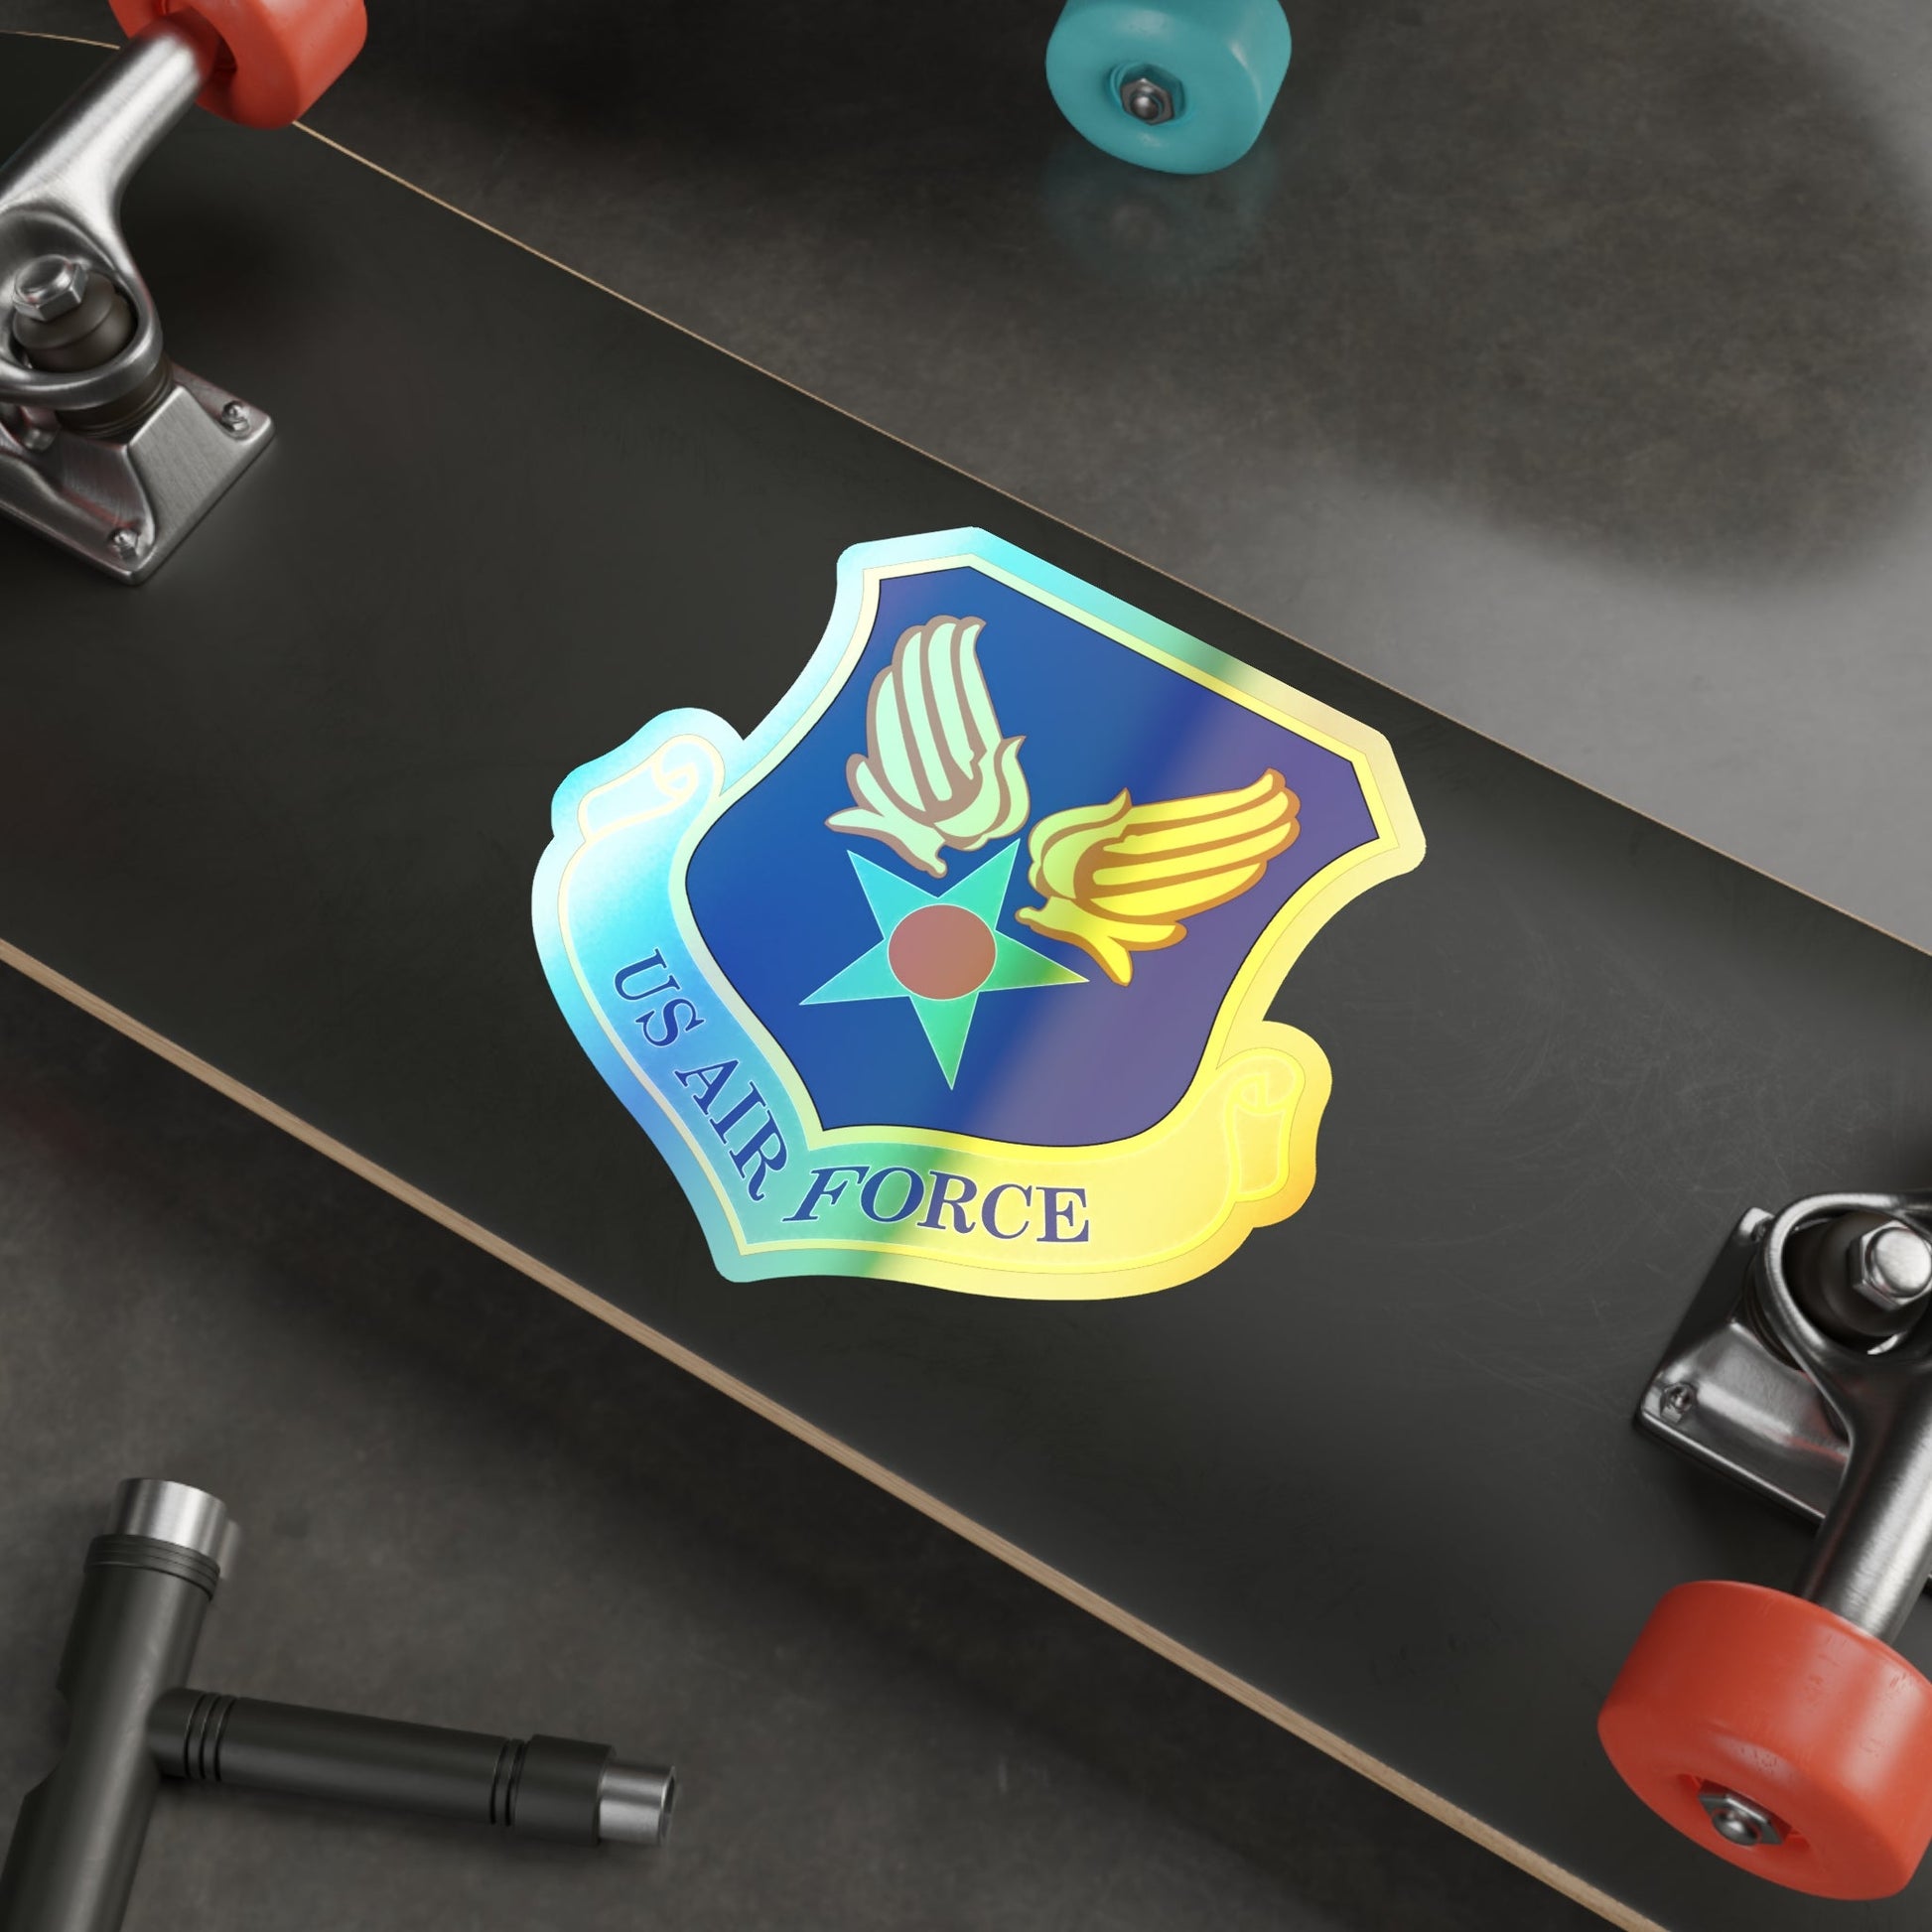 Headquarters United States Air Force (U.S. Air Force) Holographic STICKER Die-Cut Vinyl Decal-The Sticker Space